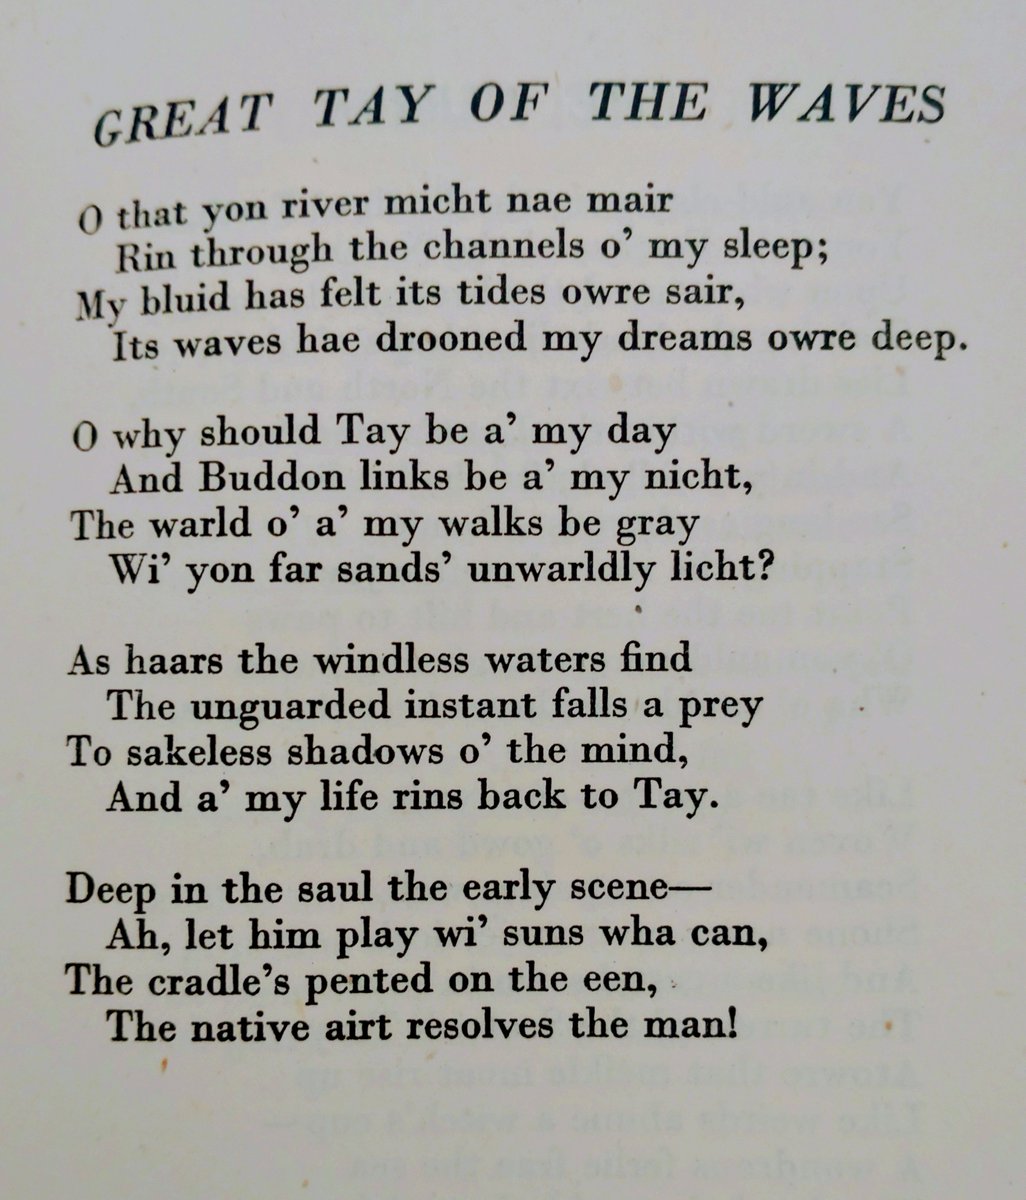 Lewis Spence, from Broughty Ferry, Dundee, was a forerunner of MacDiarmid's in his use of Scots. This poem on the River Tay is probably my favourite of his. Not much attention is paid to Spence now. What are the best critical sources on (any aspect) of his work?